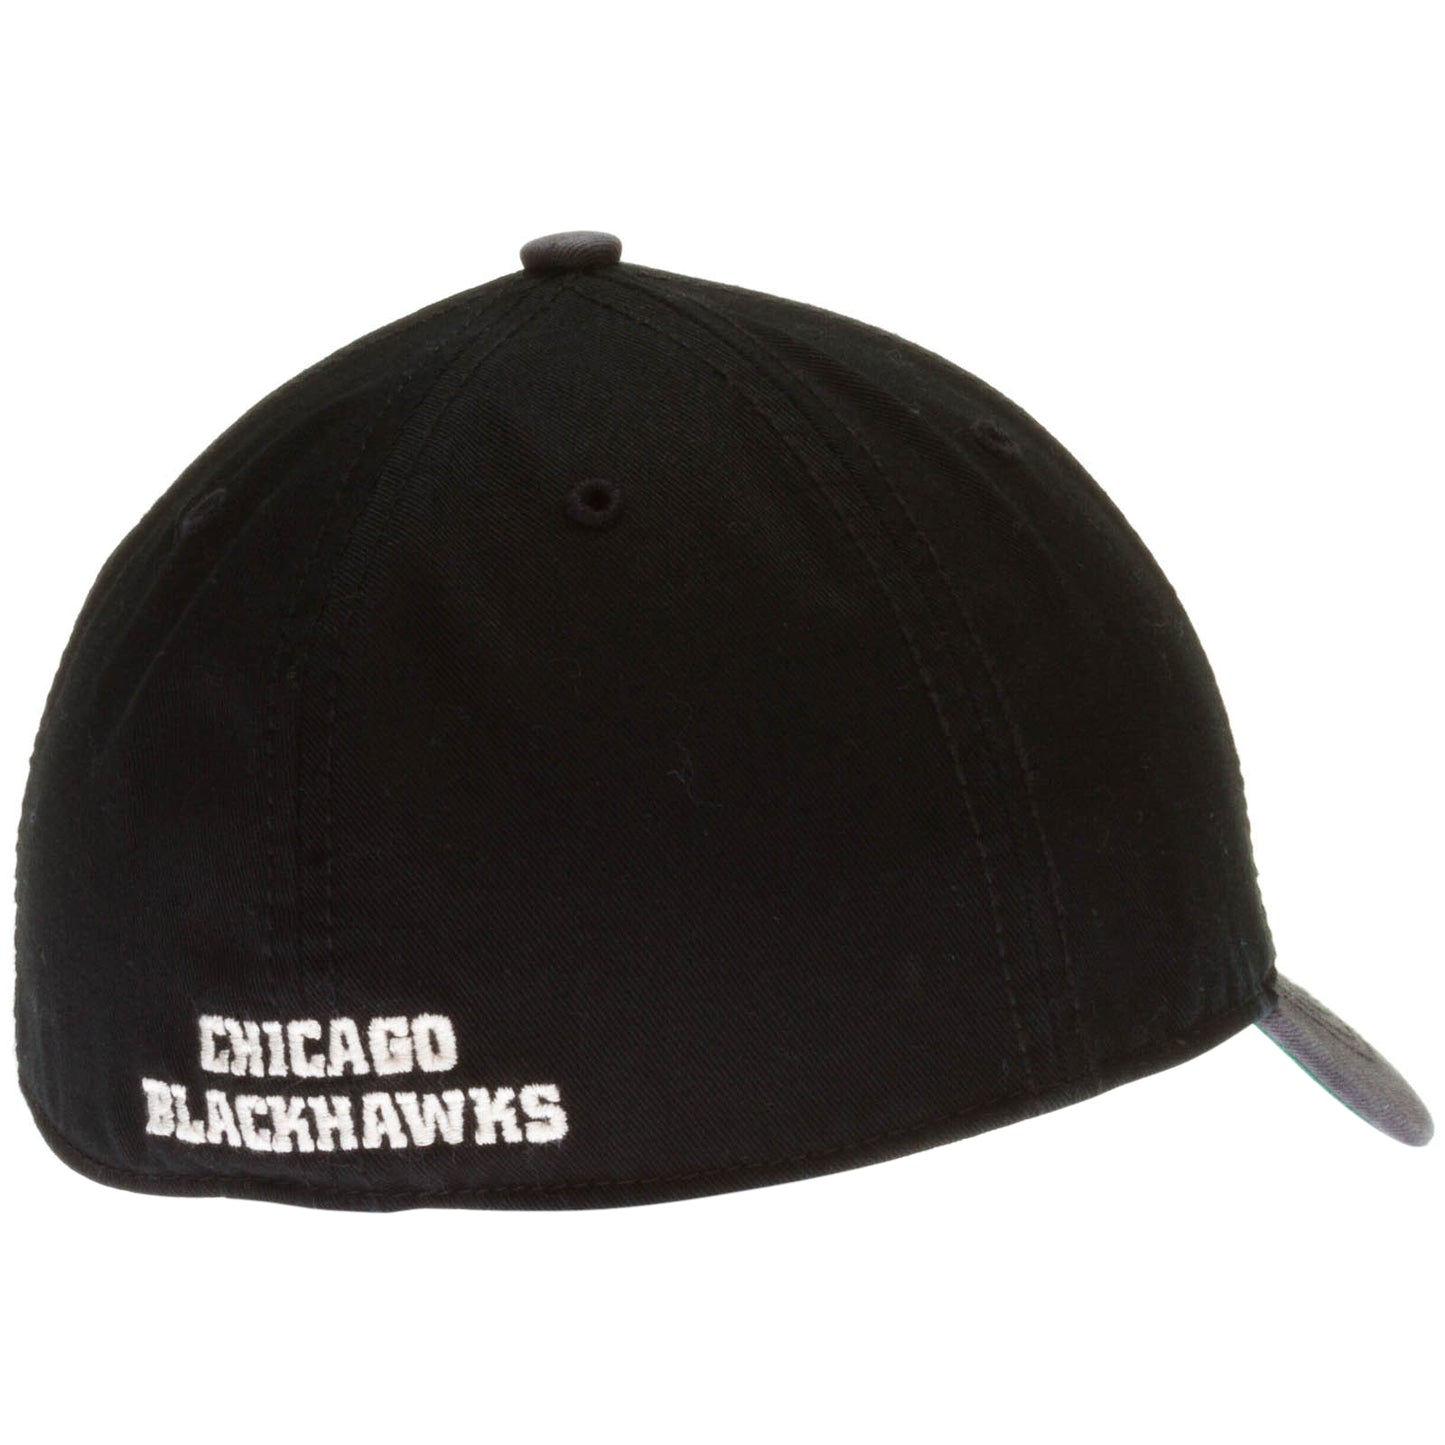 Chicago Blackhawks Grey and Black Primary Logo Franchise Fitted Hat